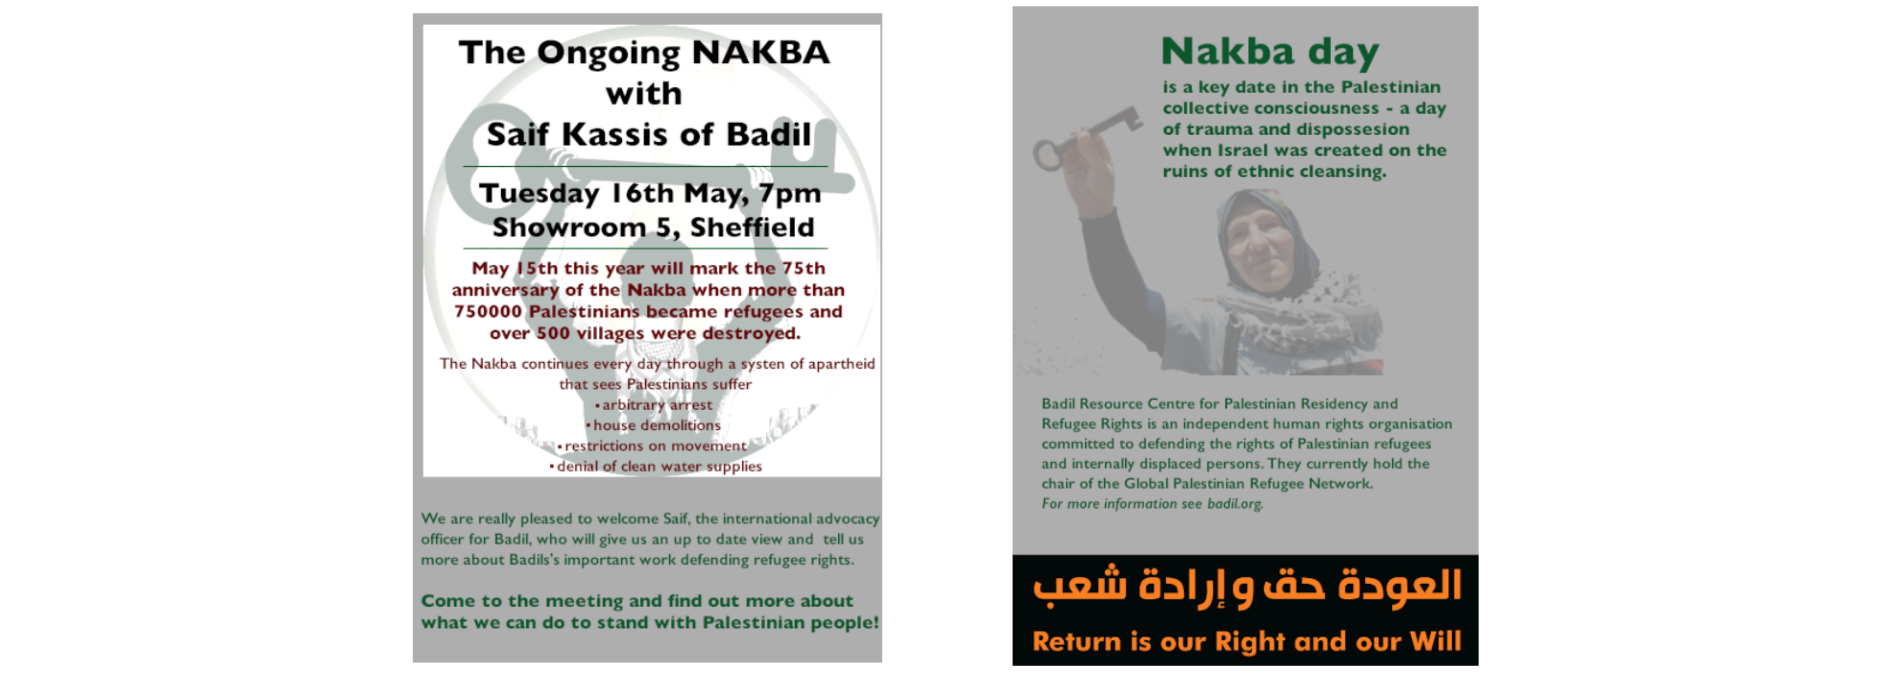 The Ongoing NAKBA: Palestinian Refugees and their Right of Return